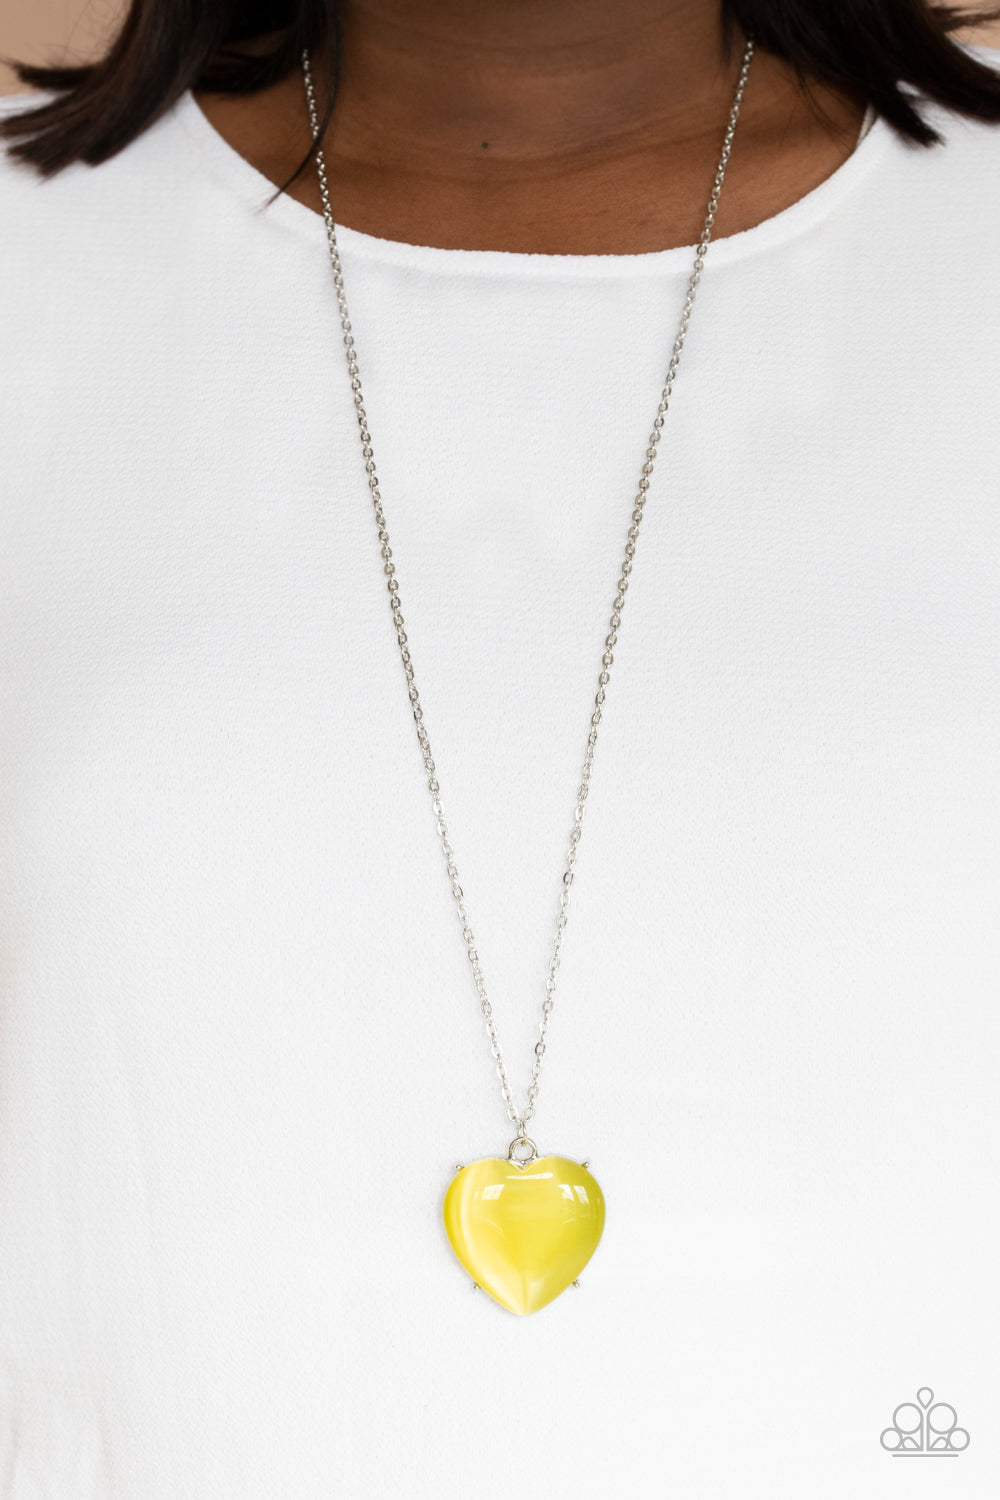 Warmhearted Glow - Yellow moonstone necklace